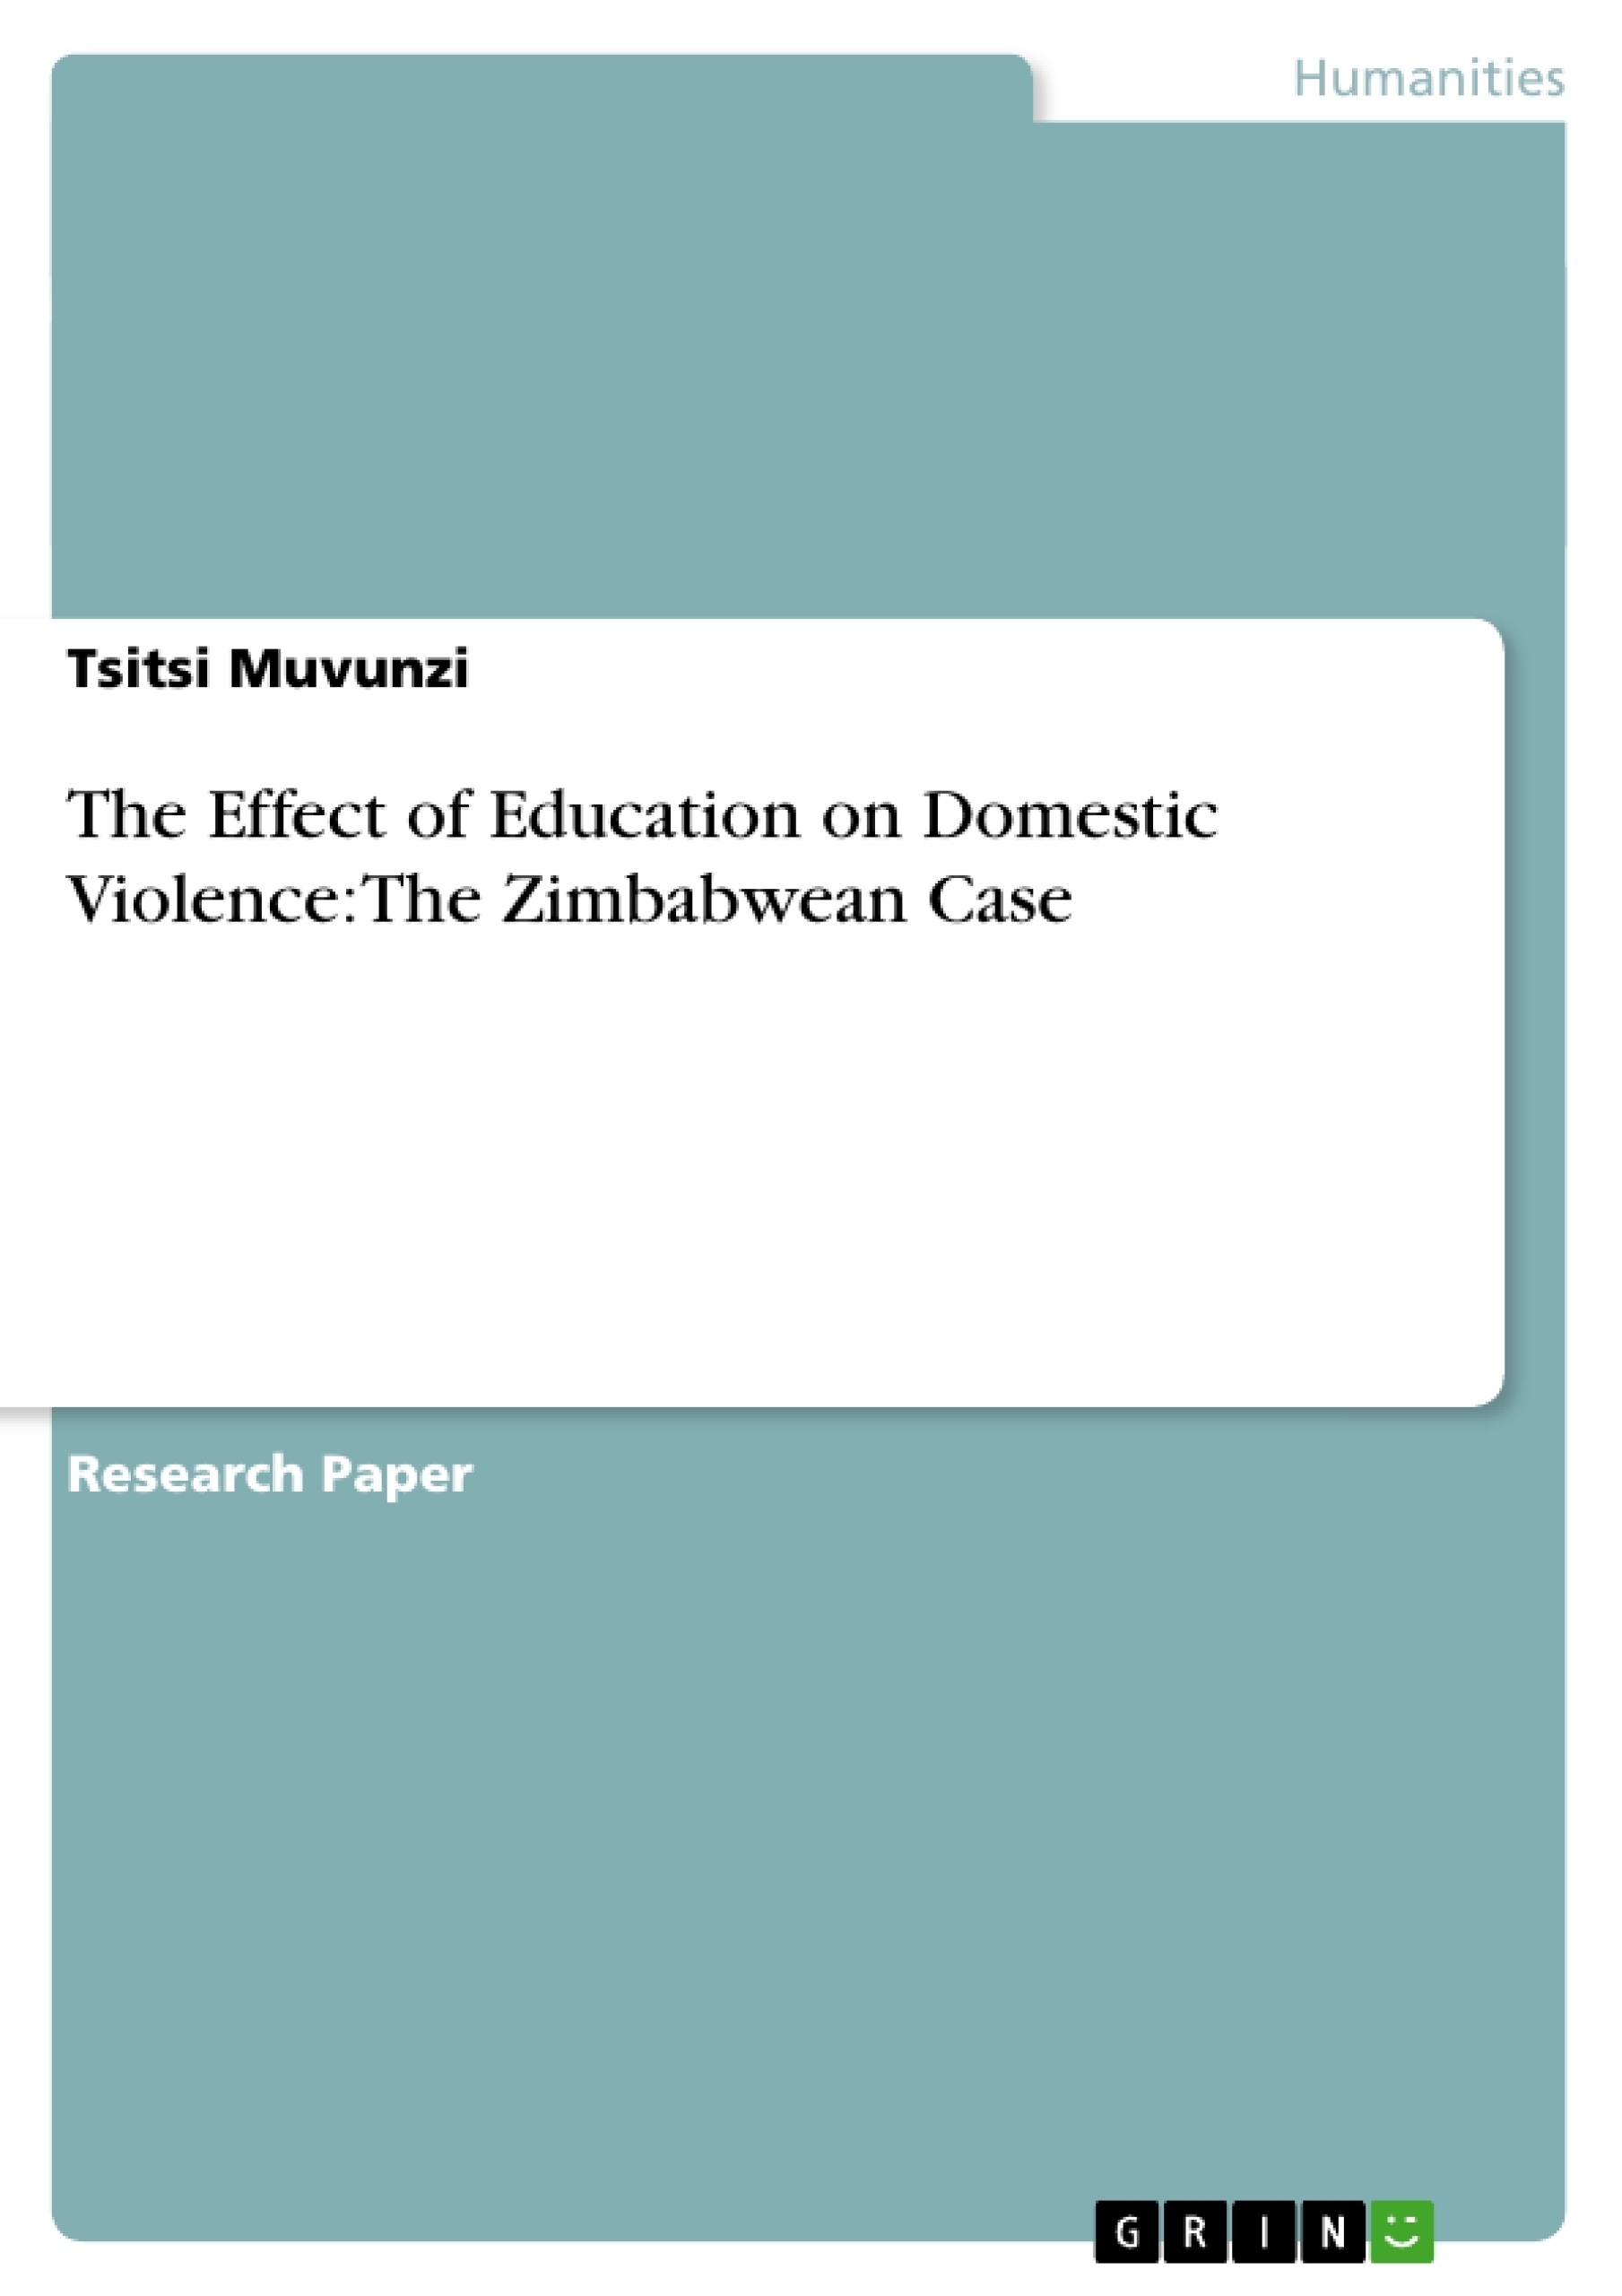 Title: The Effect of Education on Domestic Violence: The Zimbabwean Case